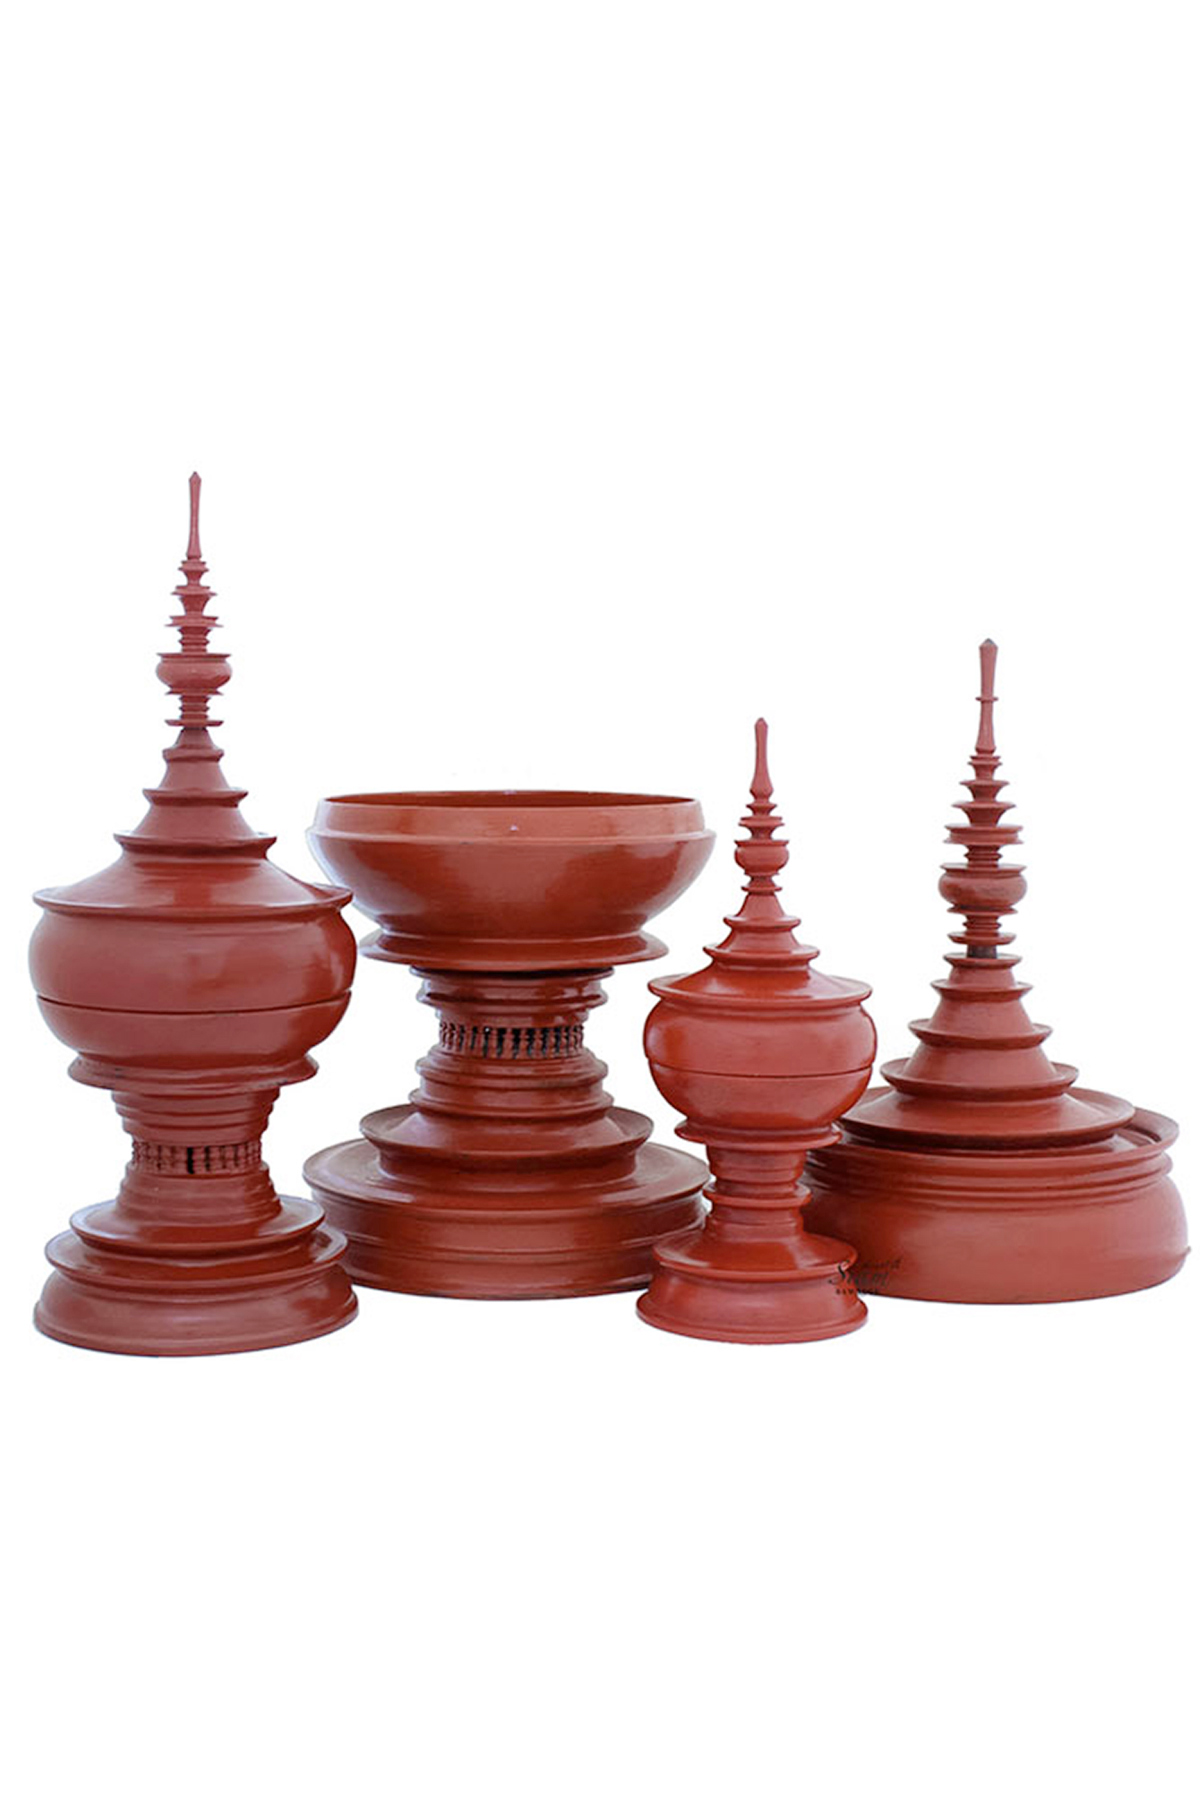 Buddhist-Food-Offering-Vessel-Handmade-Traditional-Stupa-shaped-in-red-color-from-Myanmar-Oriental-Decor